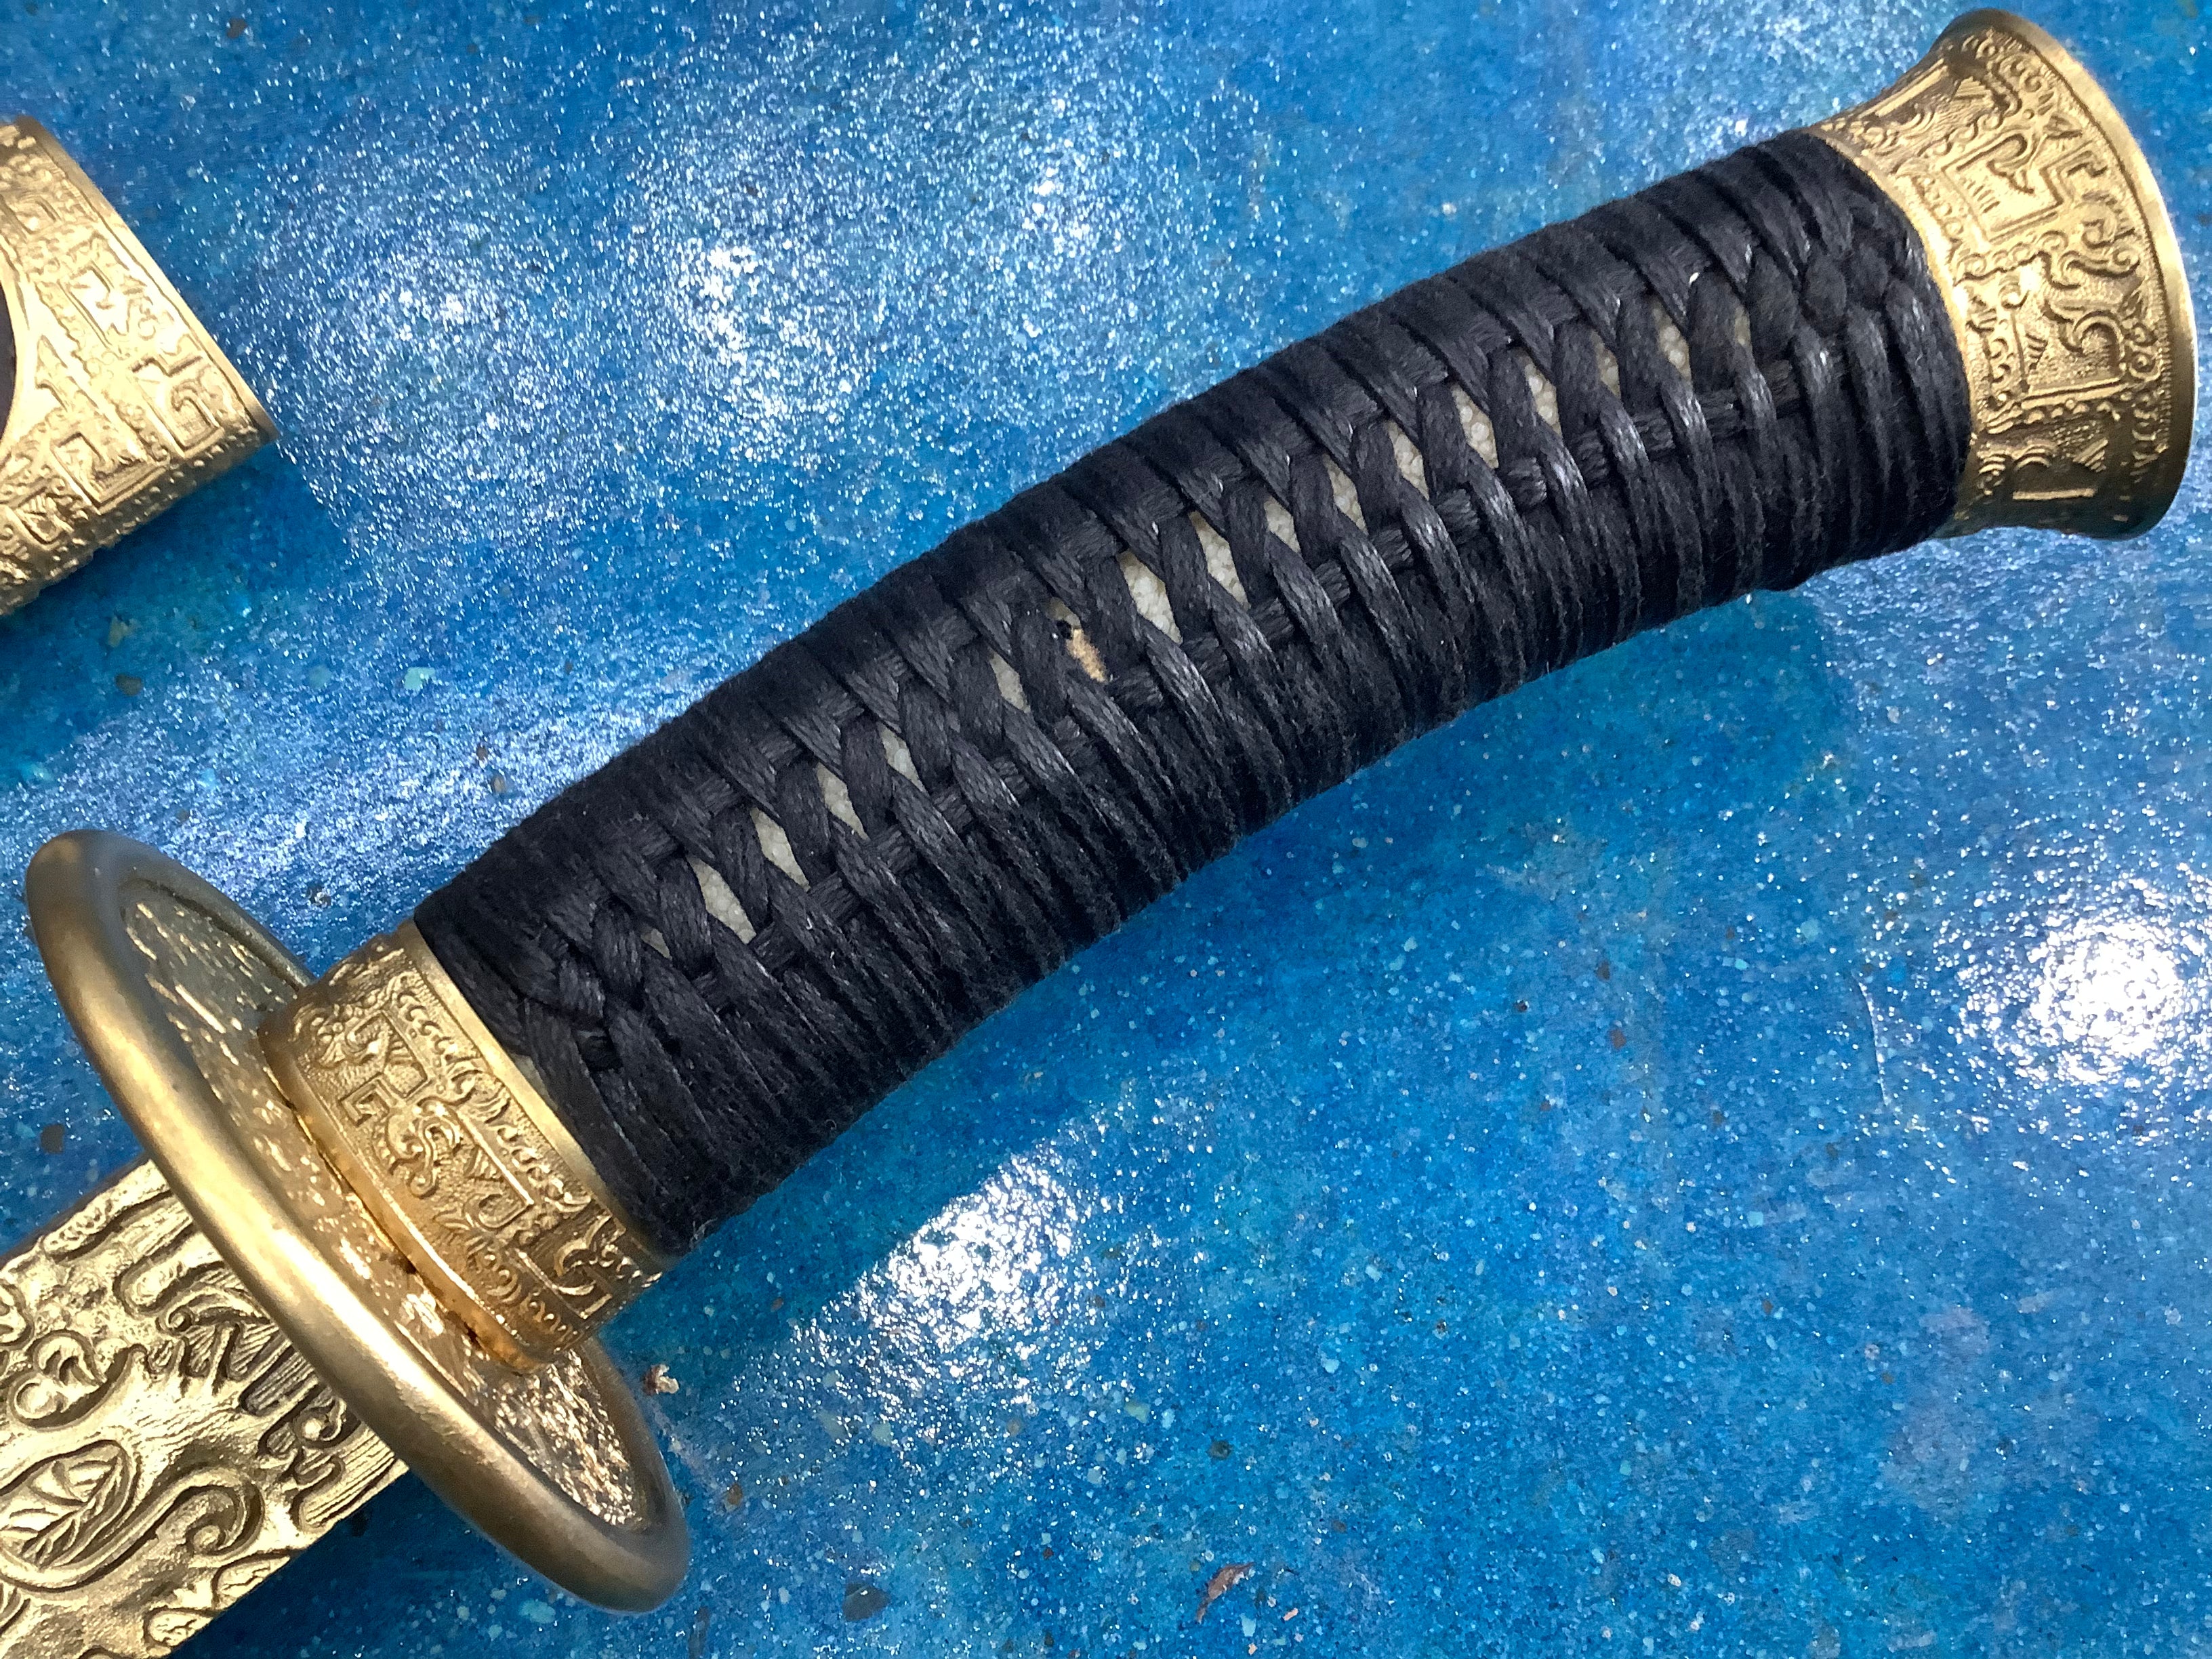 Cold Steel Chinese Saber